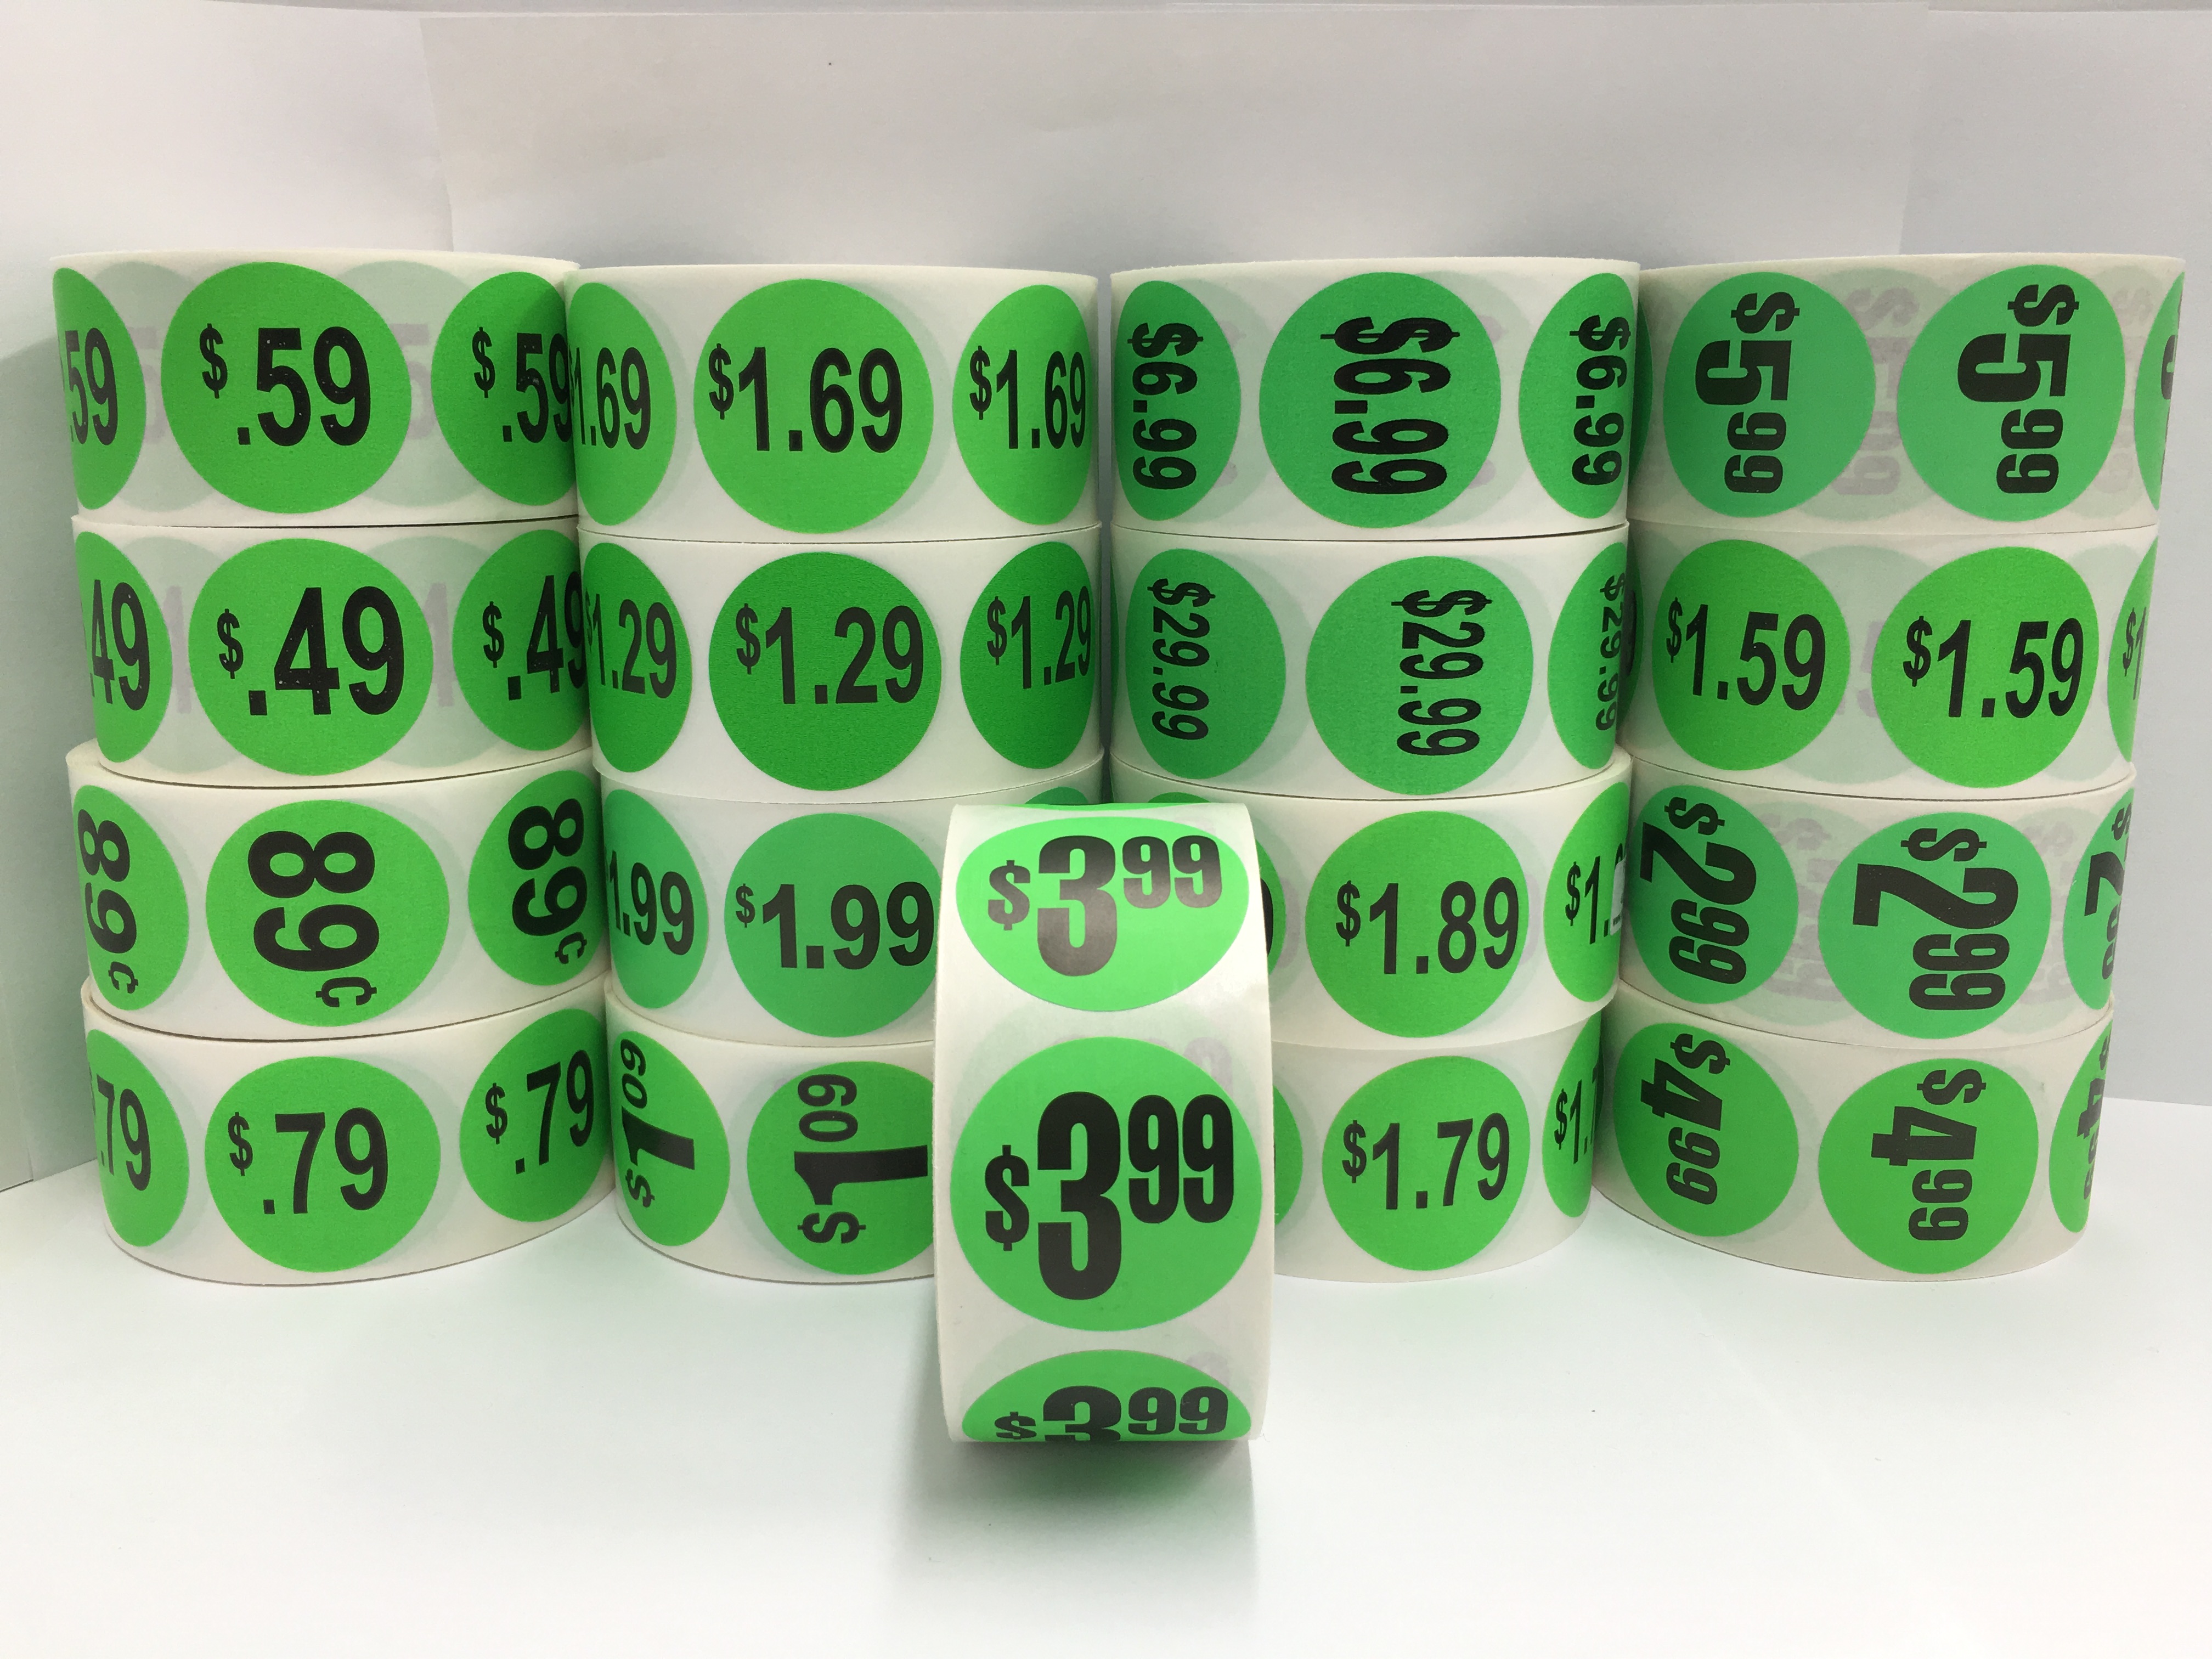 32mm 1,000 LABELS PER ROLL BLUE & WHITE RETAIL PRICE POINT LABELS FOR SHOPS 